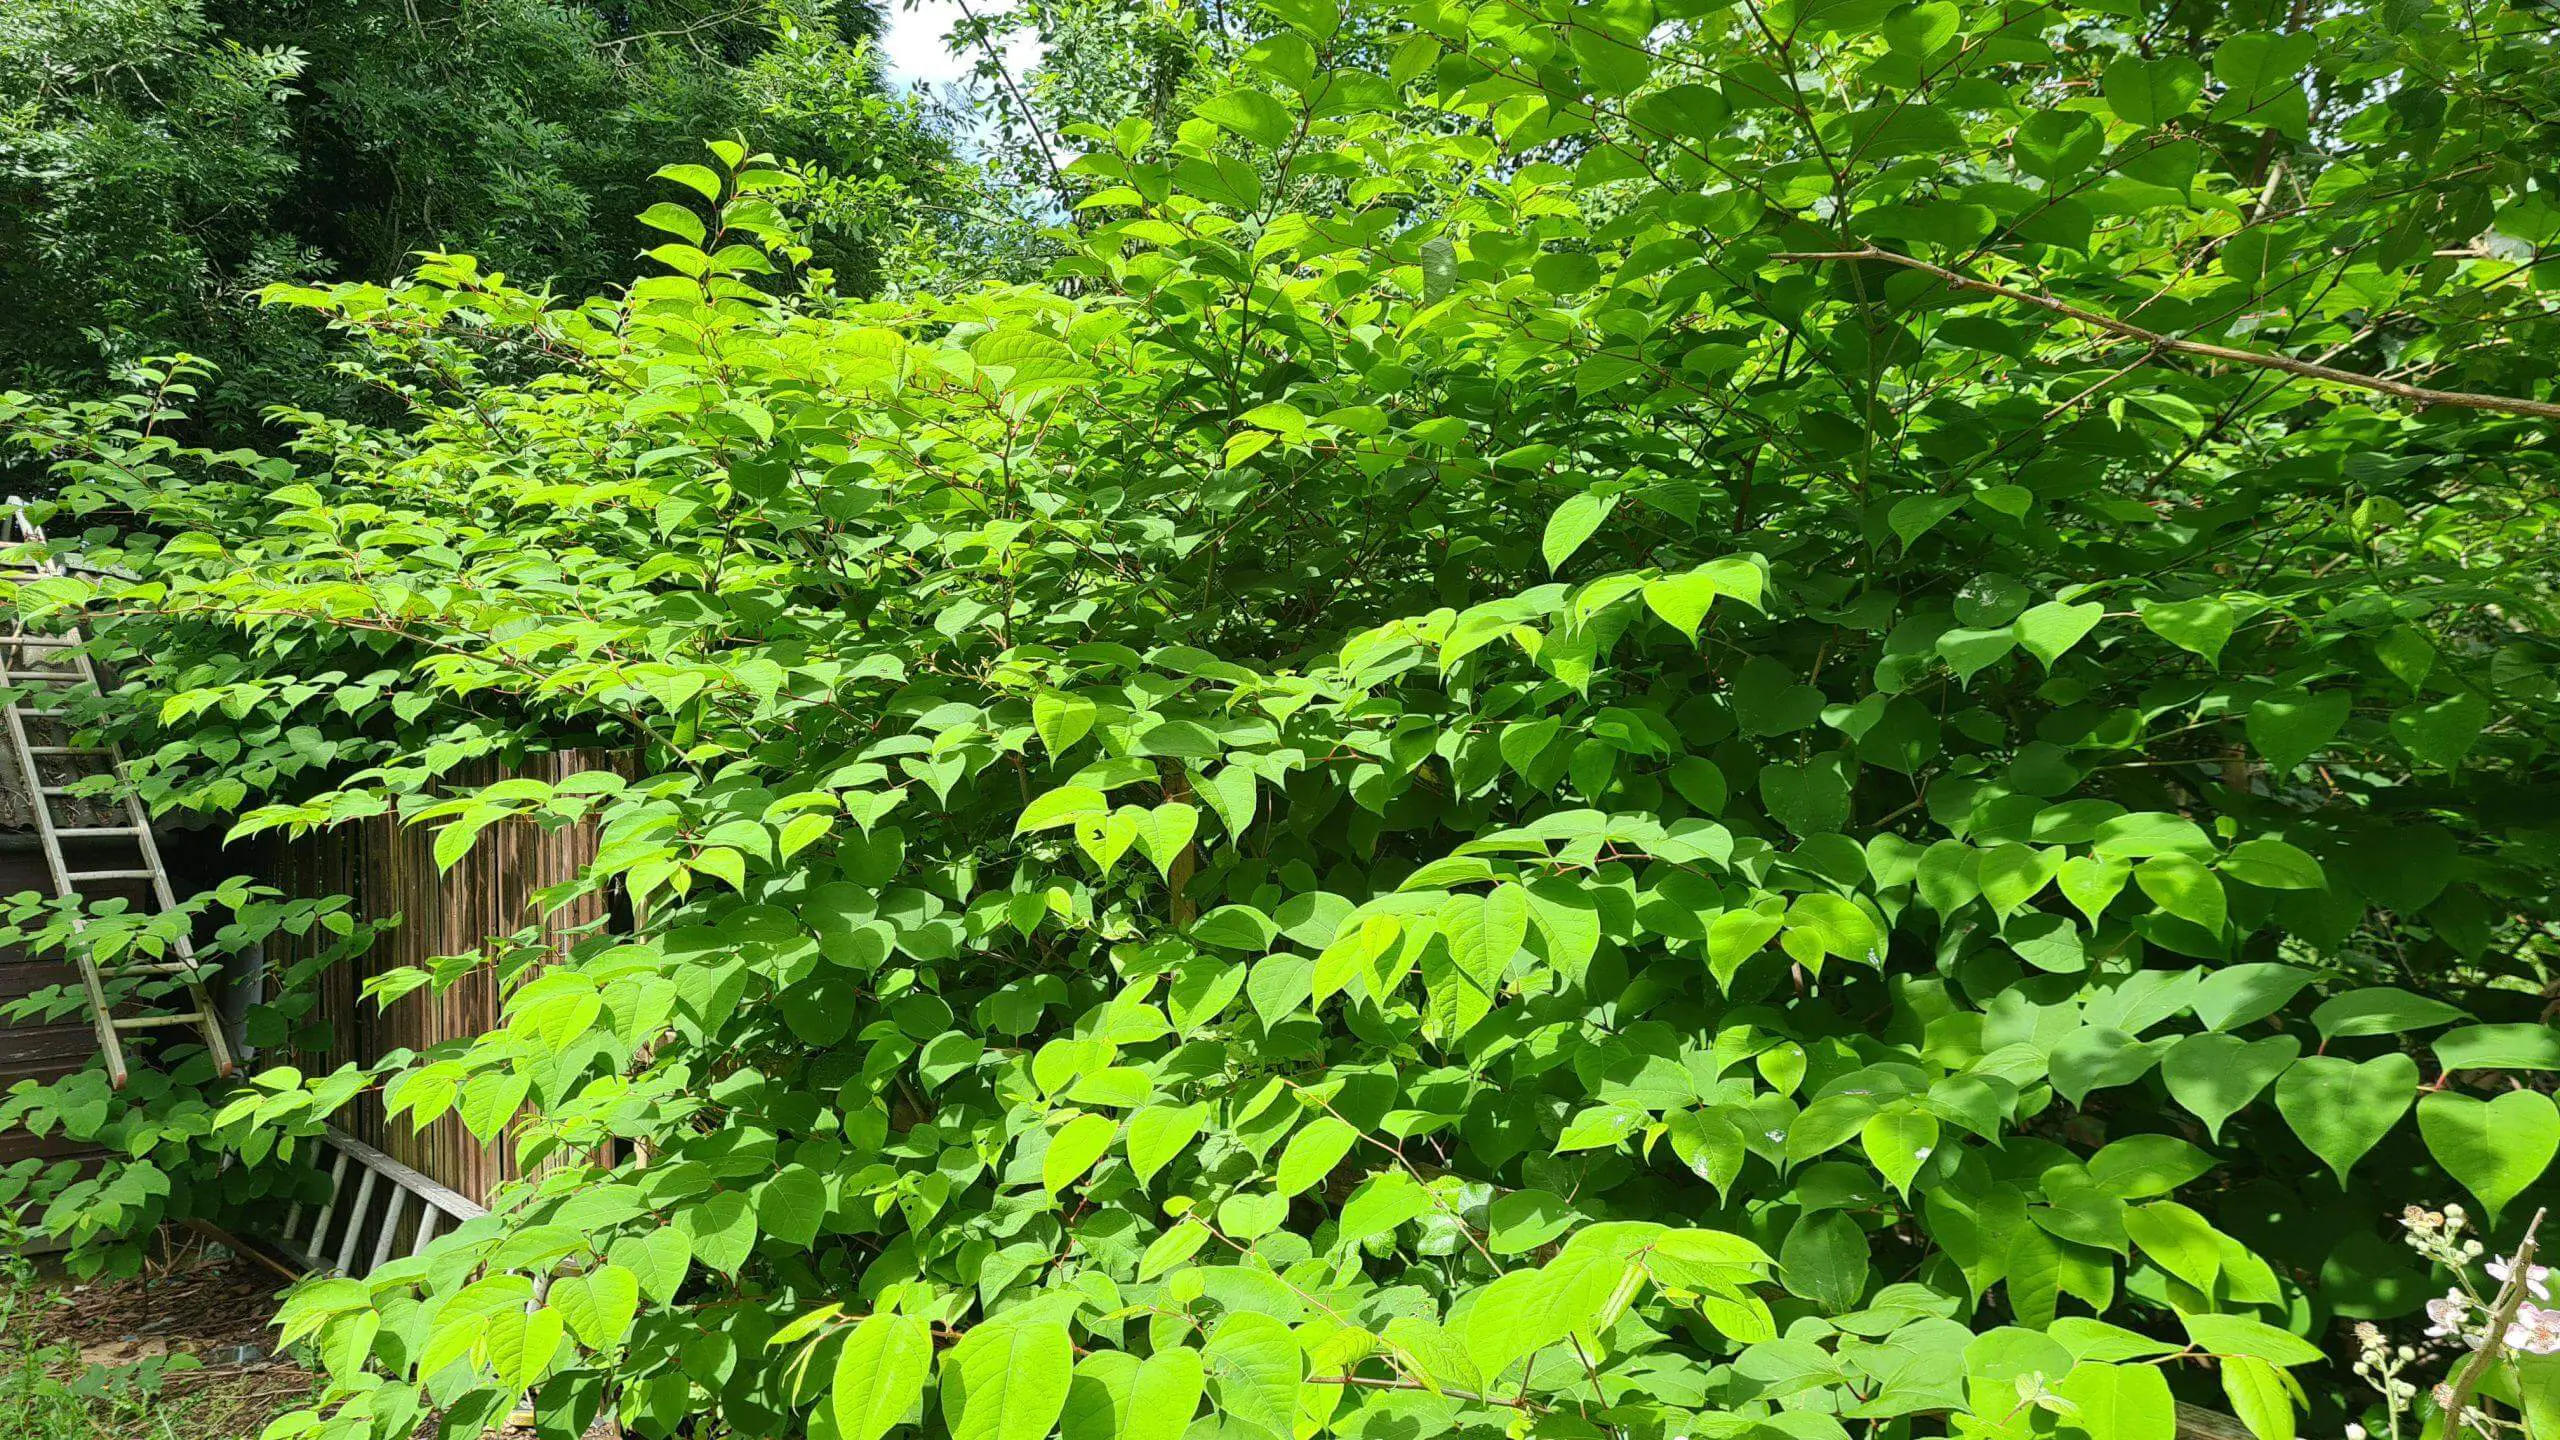 Choose the best weed killer to kill Japanese knotweed scaled